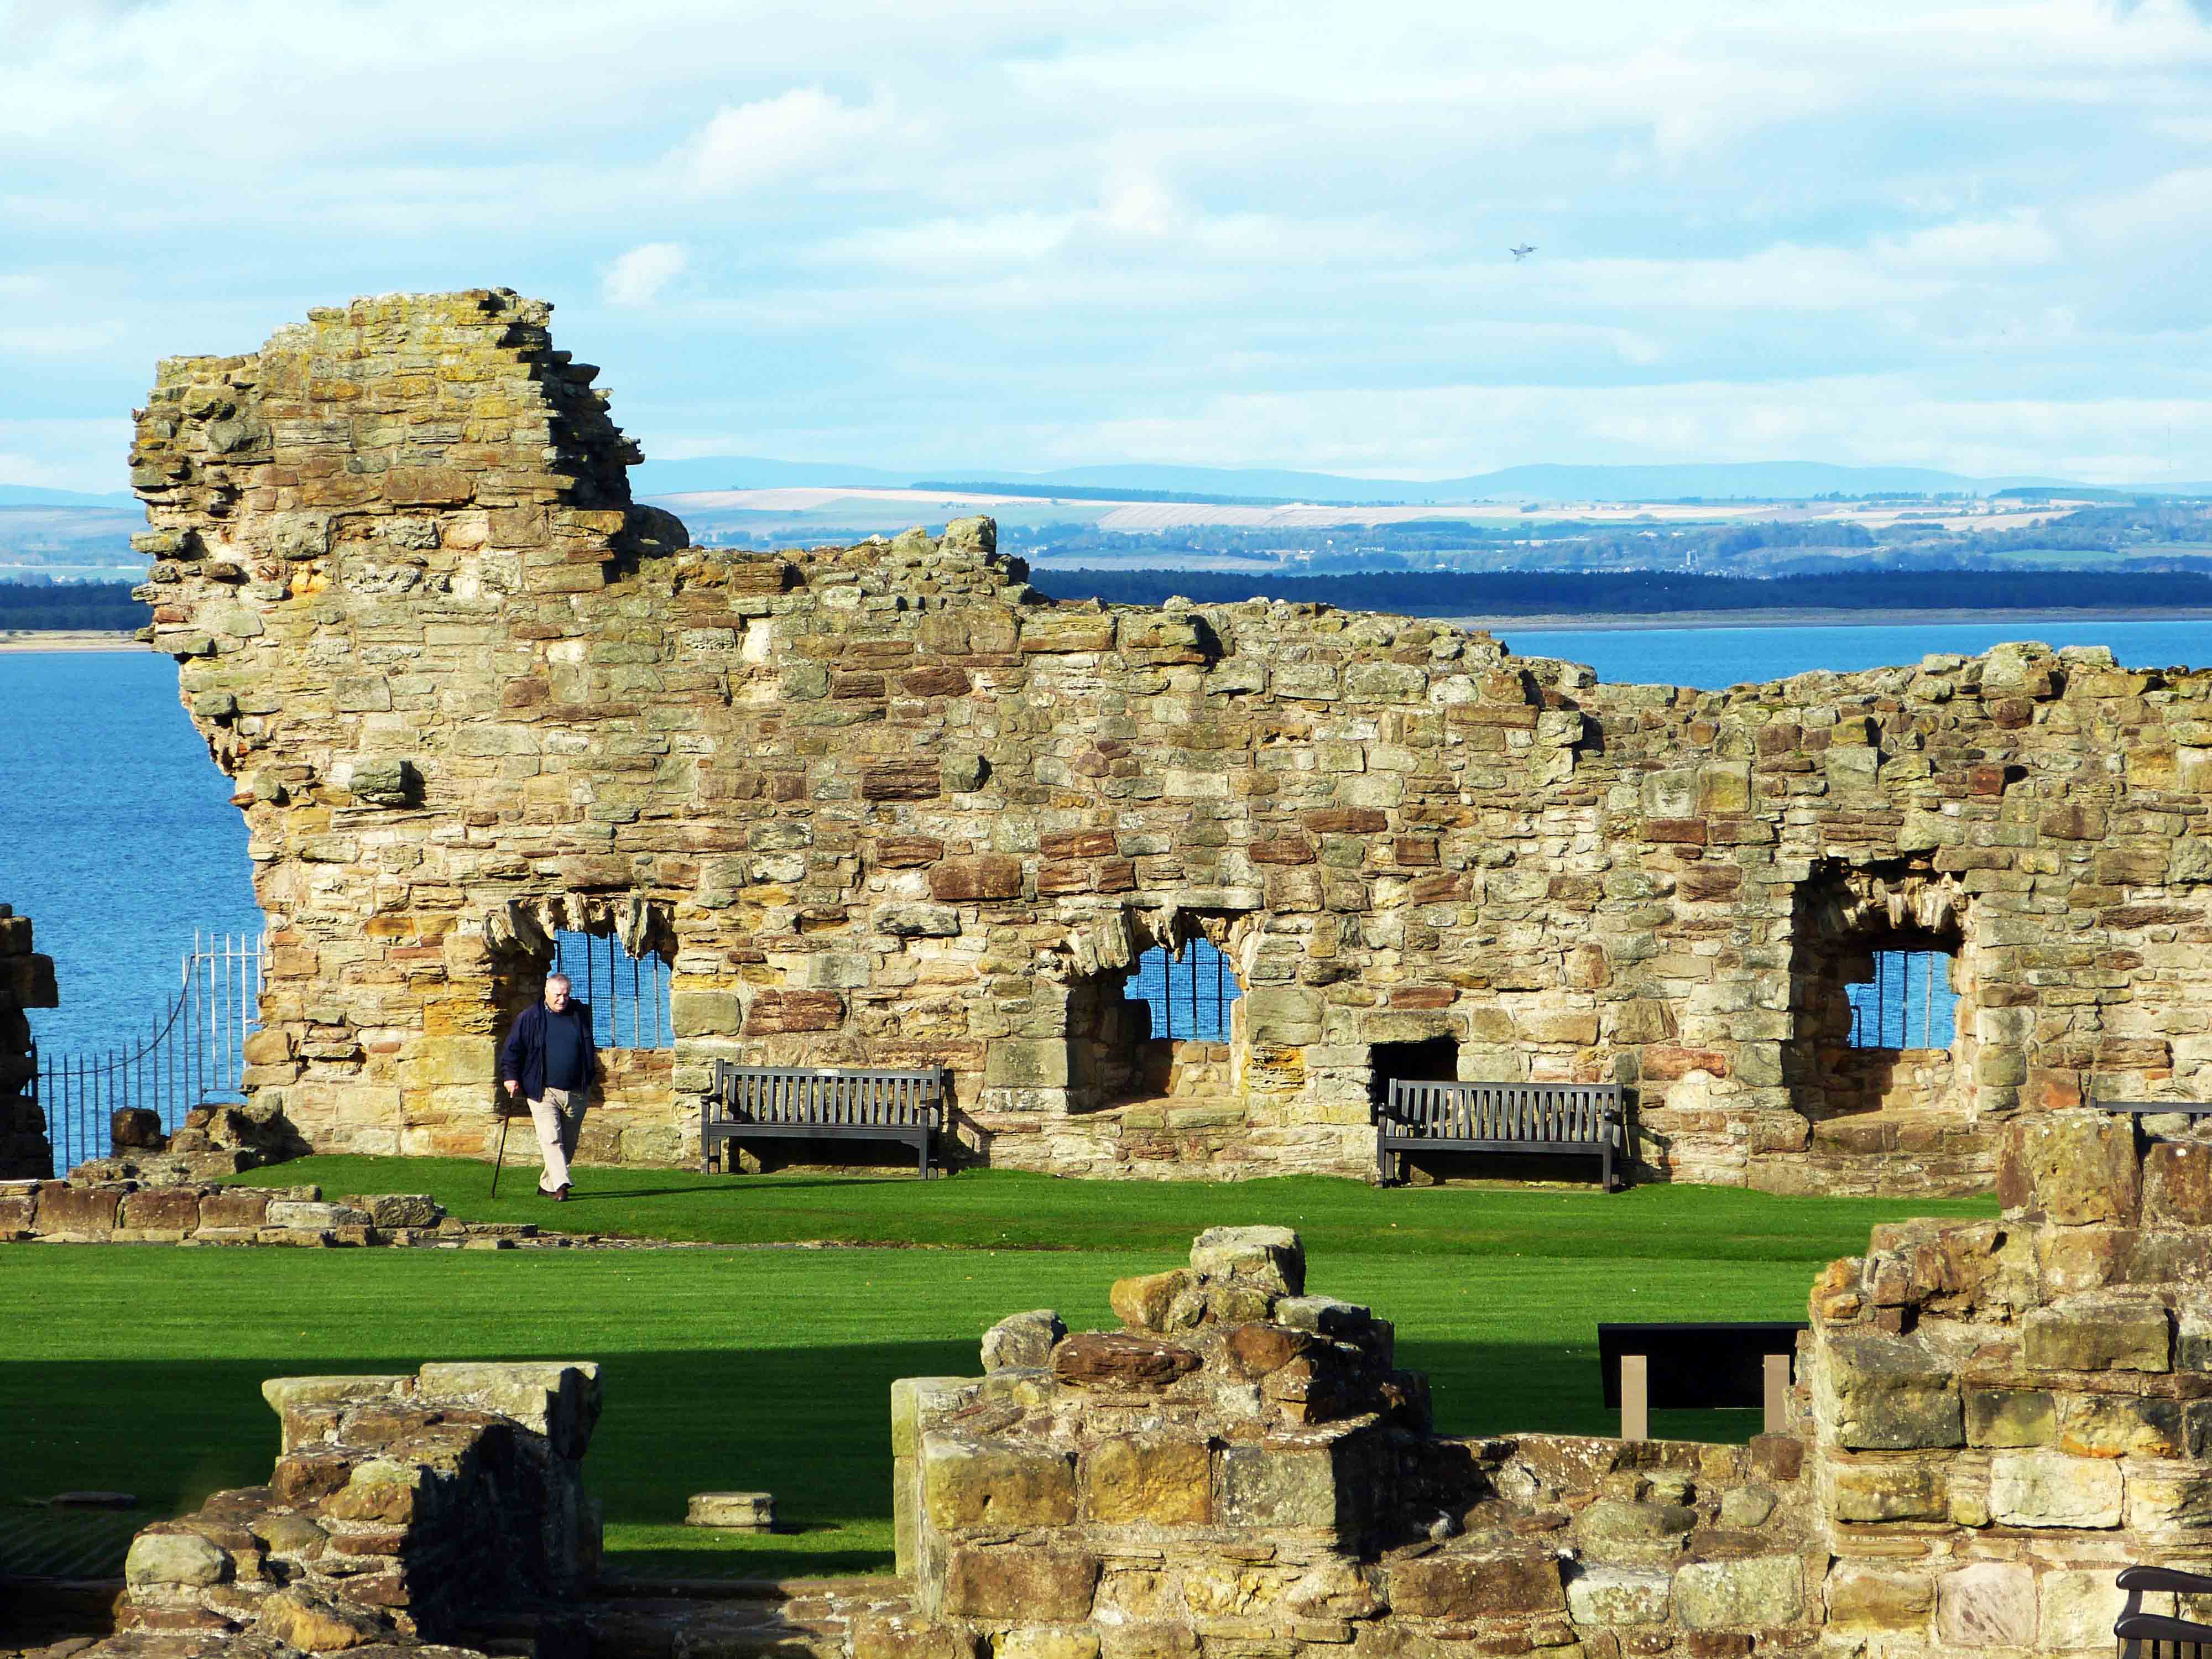 View of historic ruins in St Andrews, Scotland.